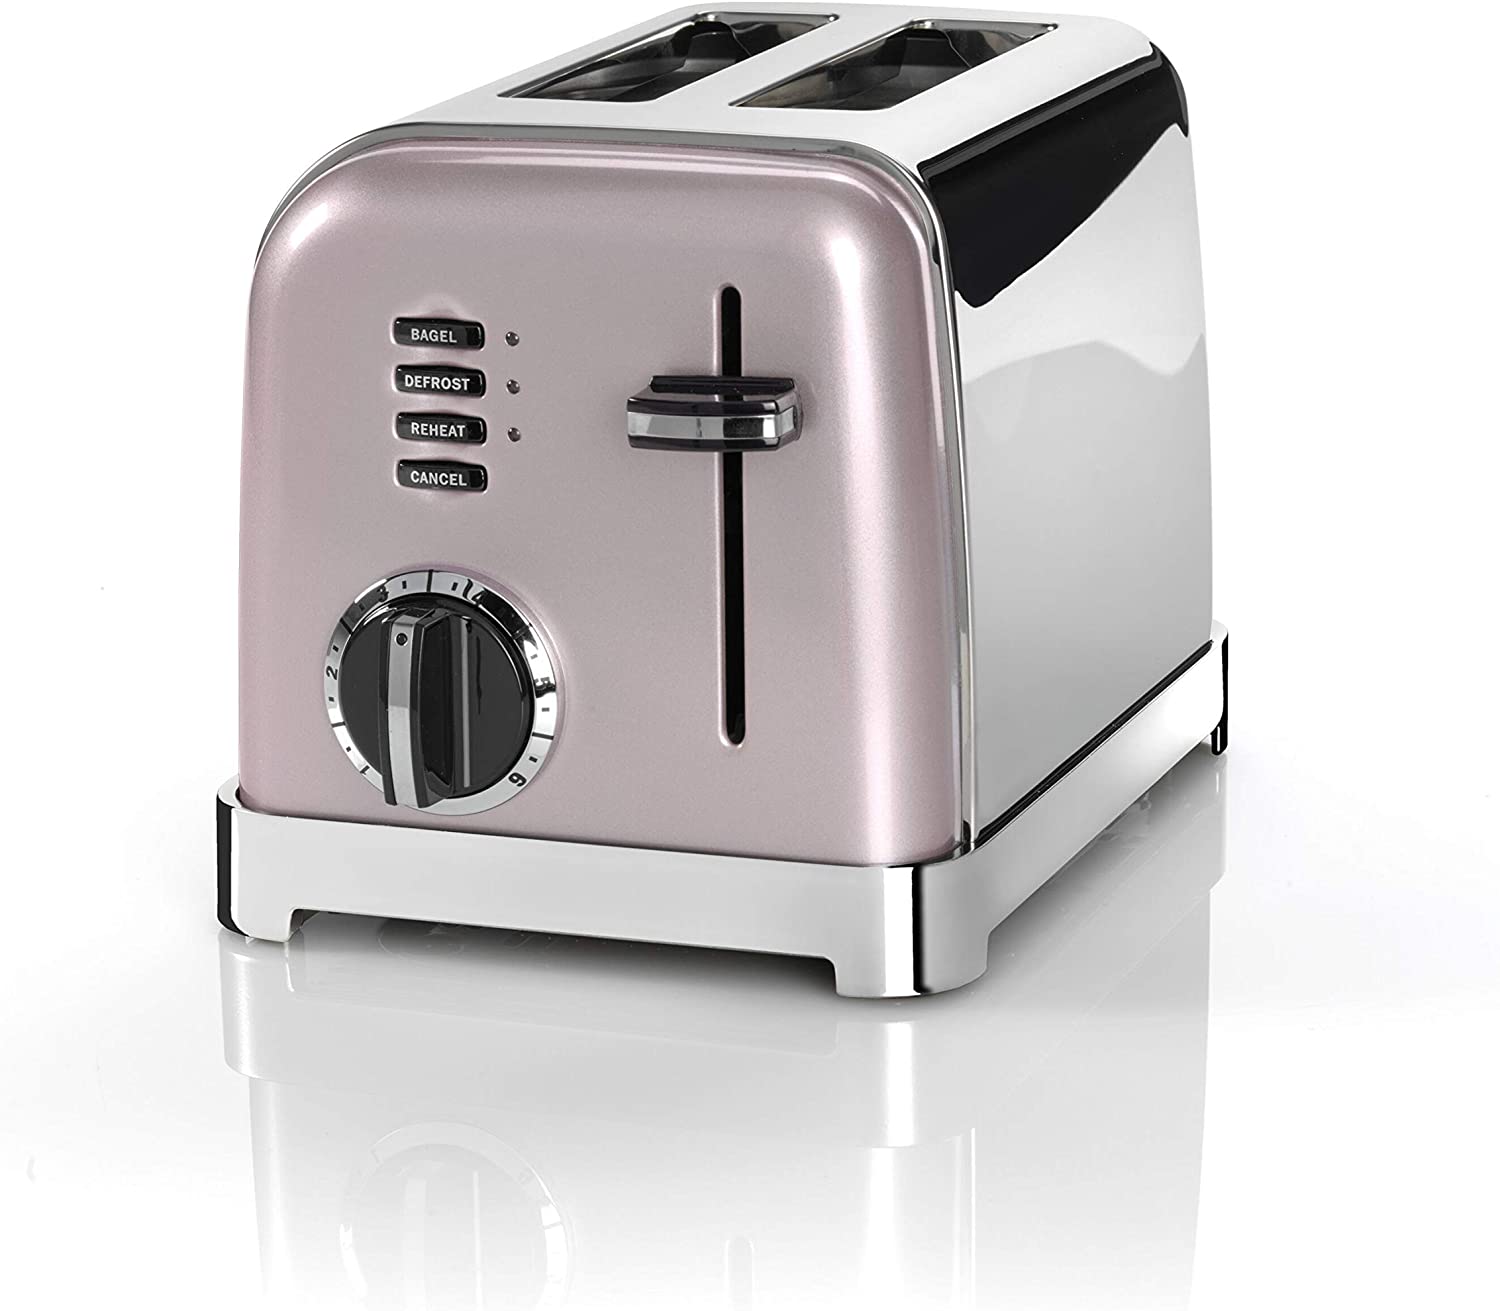 http://honestforwarder.com/uploads/product/bCxNQiWml4-cuisinart-2-slot-toaster-with-6-browning-levels-and-defrosting-warm-up-and-stop-function-extra-wide-toast-slots-retro-design-pink-cpt160pie-26739.jpg